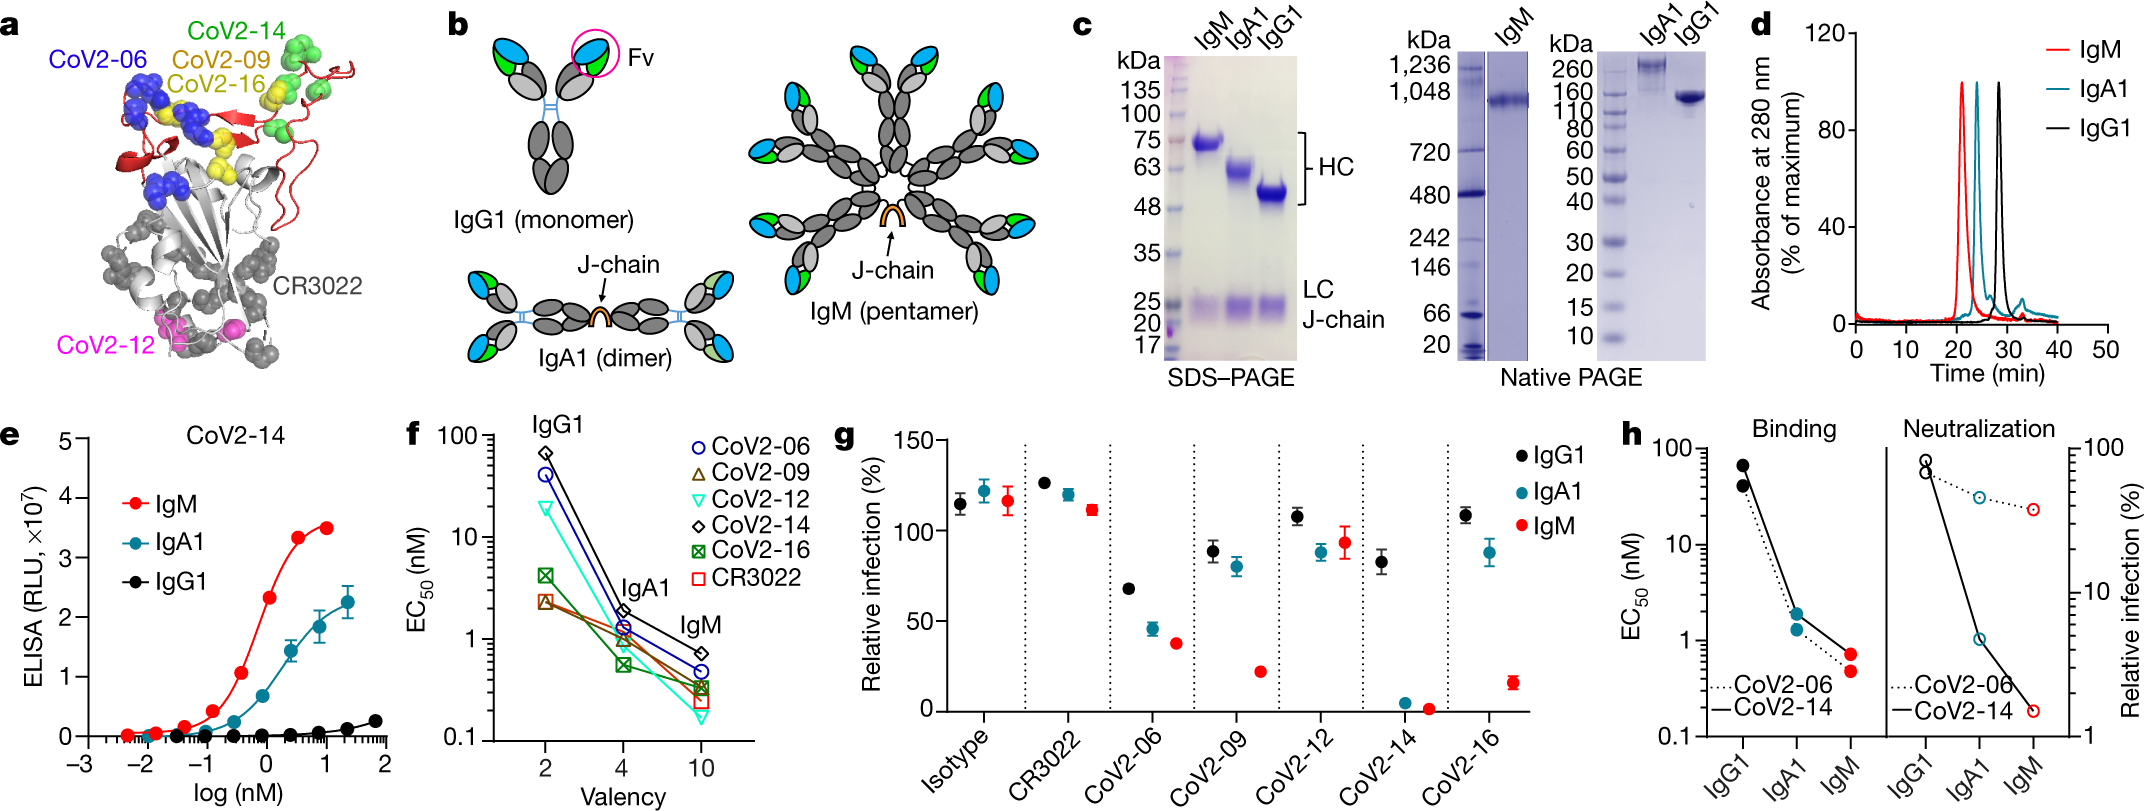 Afrika aanbidden Vakman Nasal delivery of an IgM offers broad protection from SARS-CoV-2 variants |  Nature